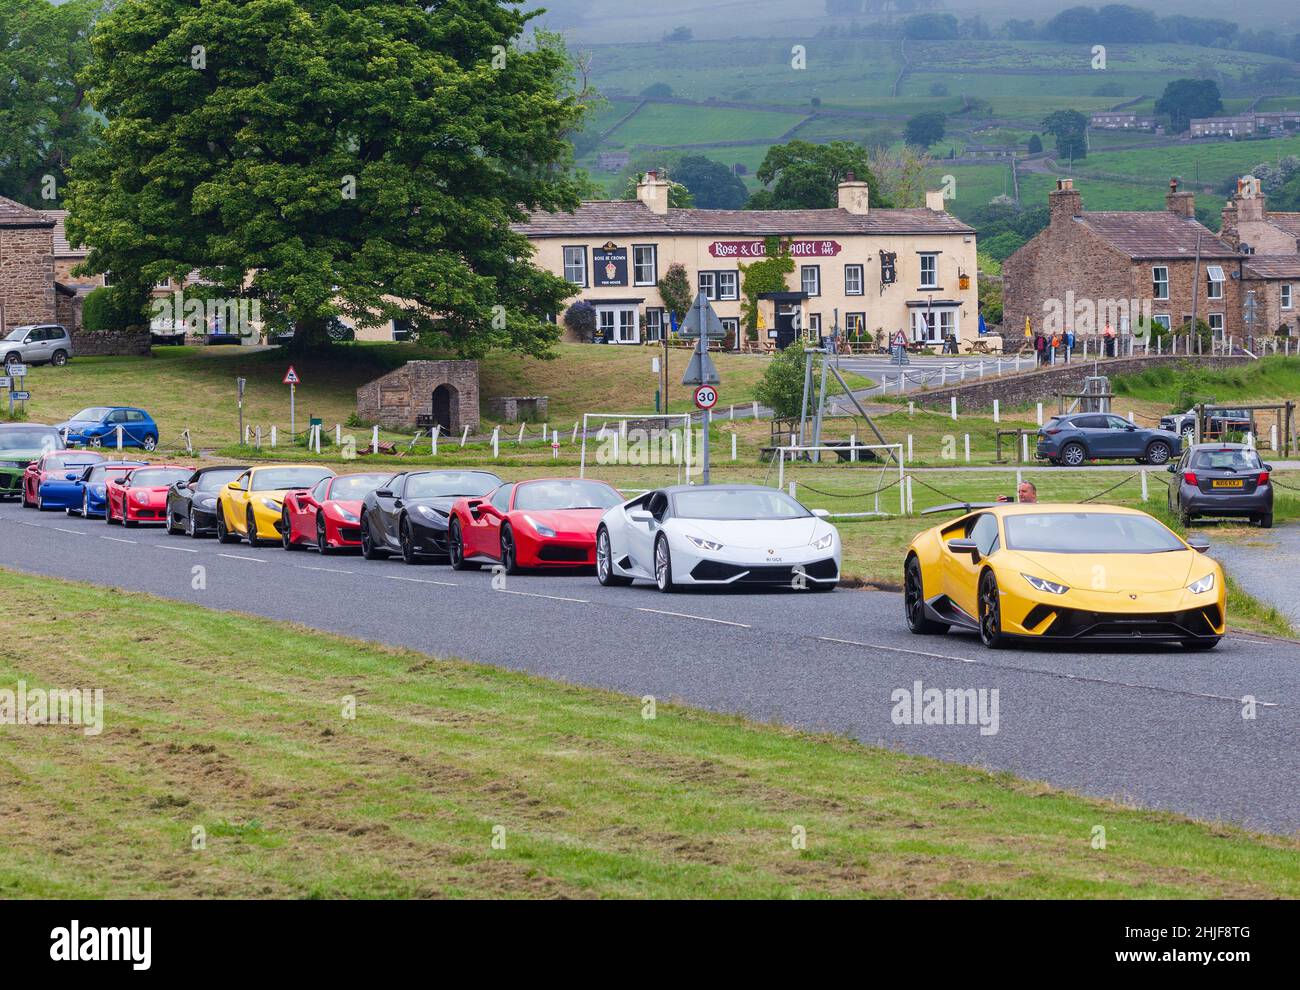 A Ferrari car club lined up in Bainbridge, Wensleydale for a drive around the Yorkshire Dales Stock Photo